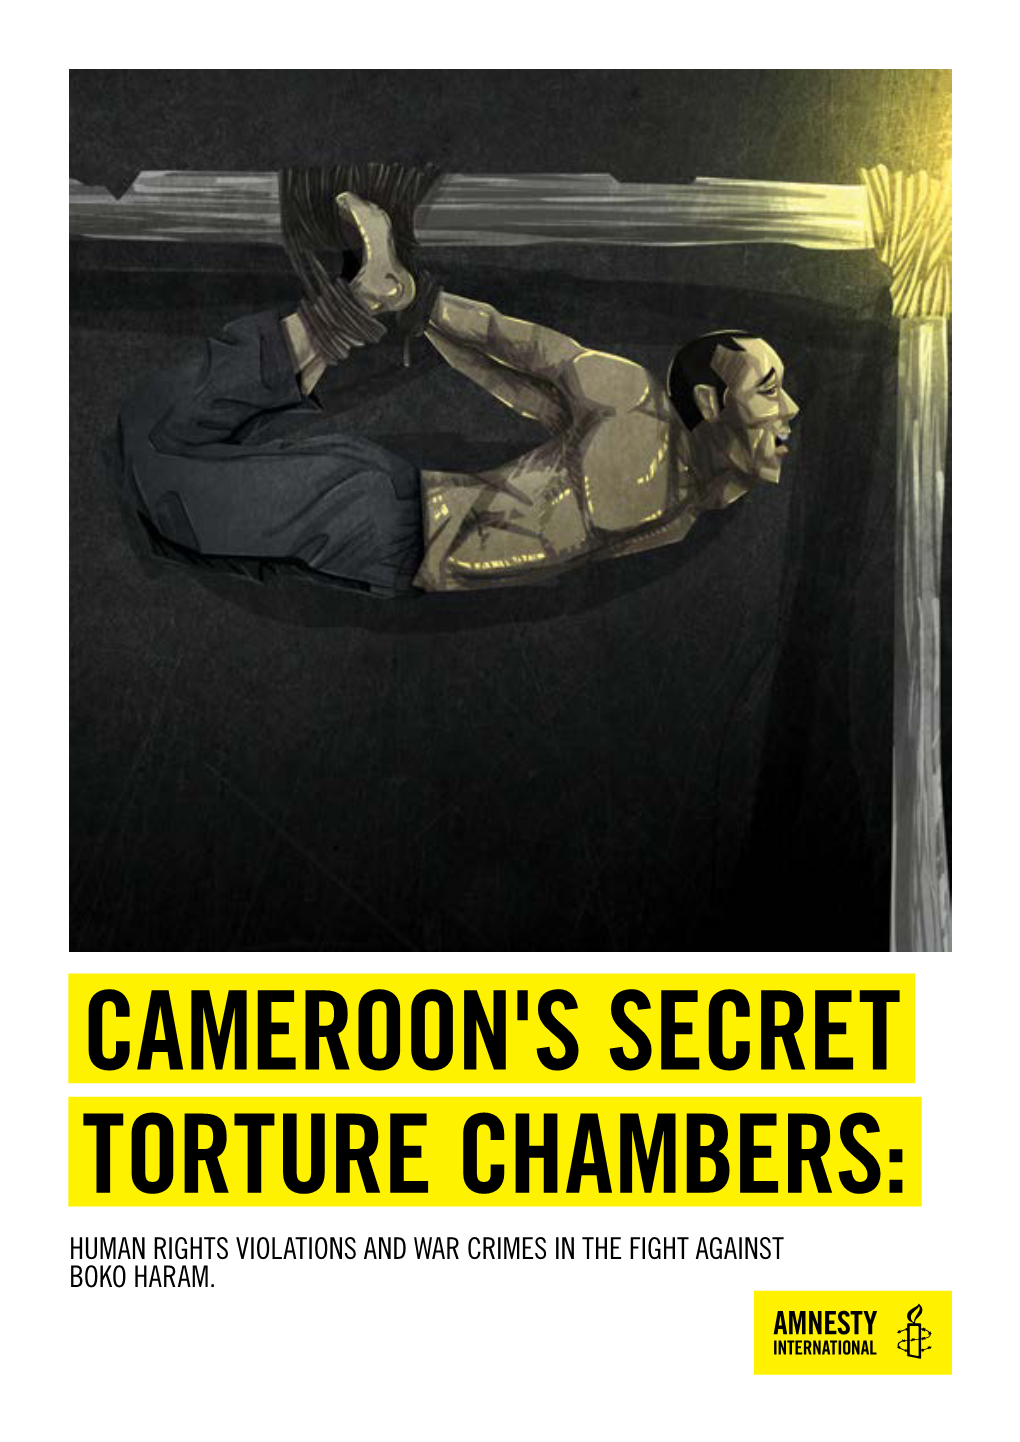 Cameroon's Secret Torture Chambers: Human Rights Violations and War Crimes in the Fight Against Boko Haram